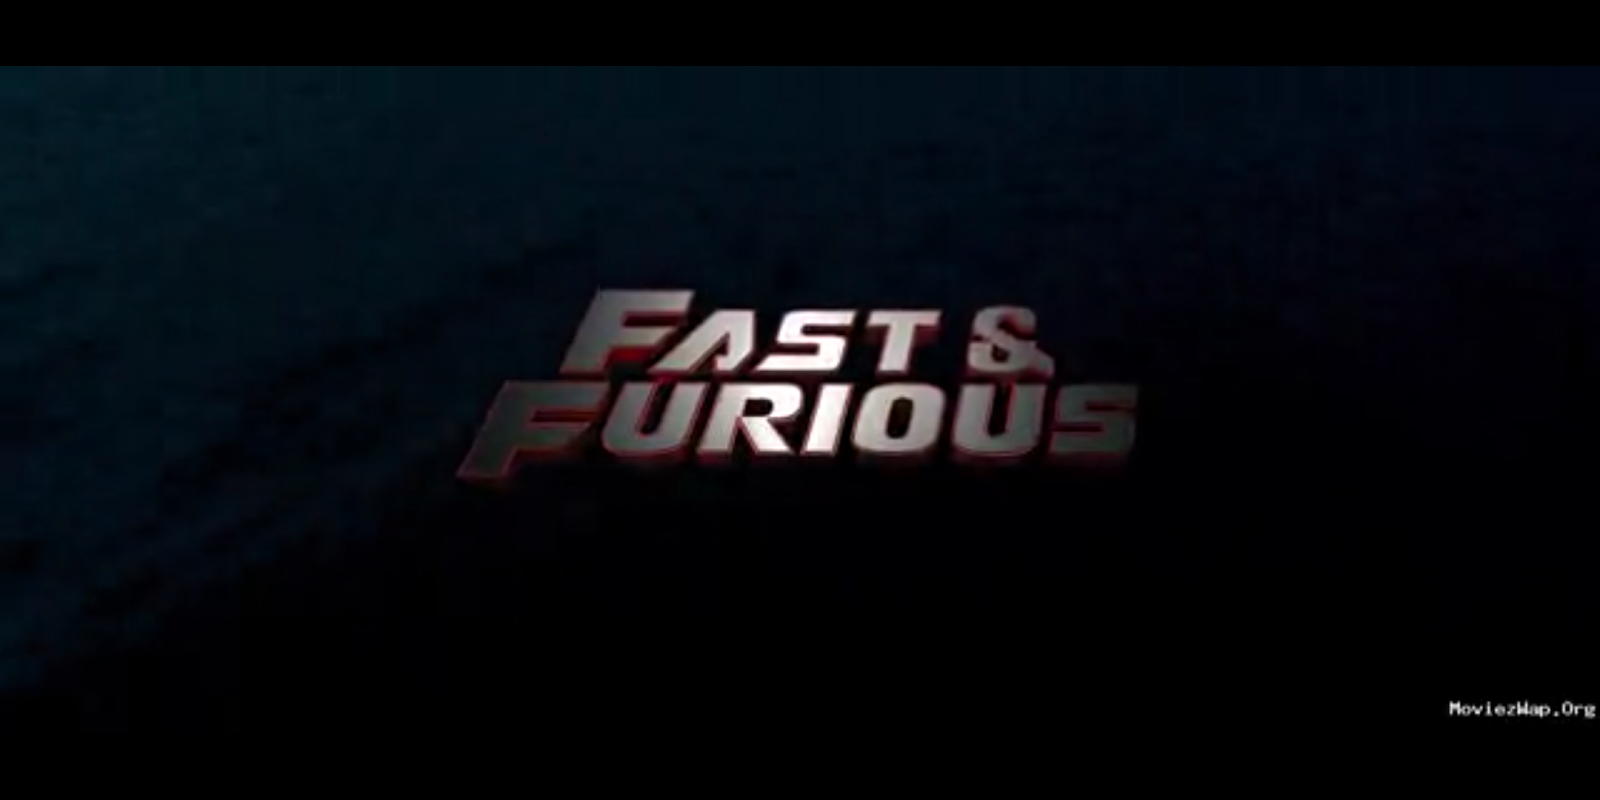 Fast and Furious 4 (2009) full movie download in telugu